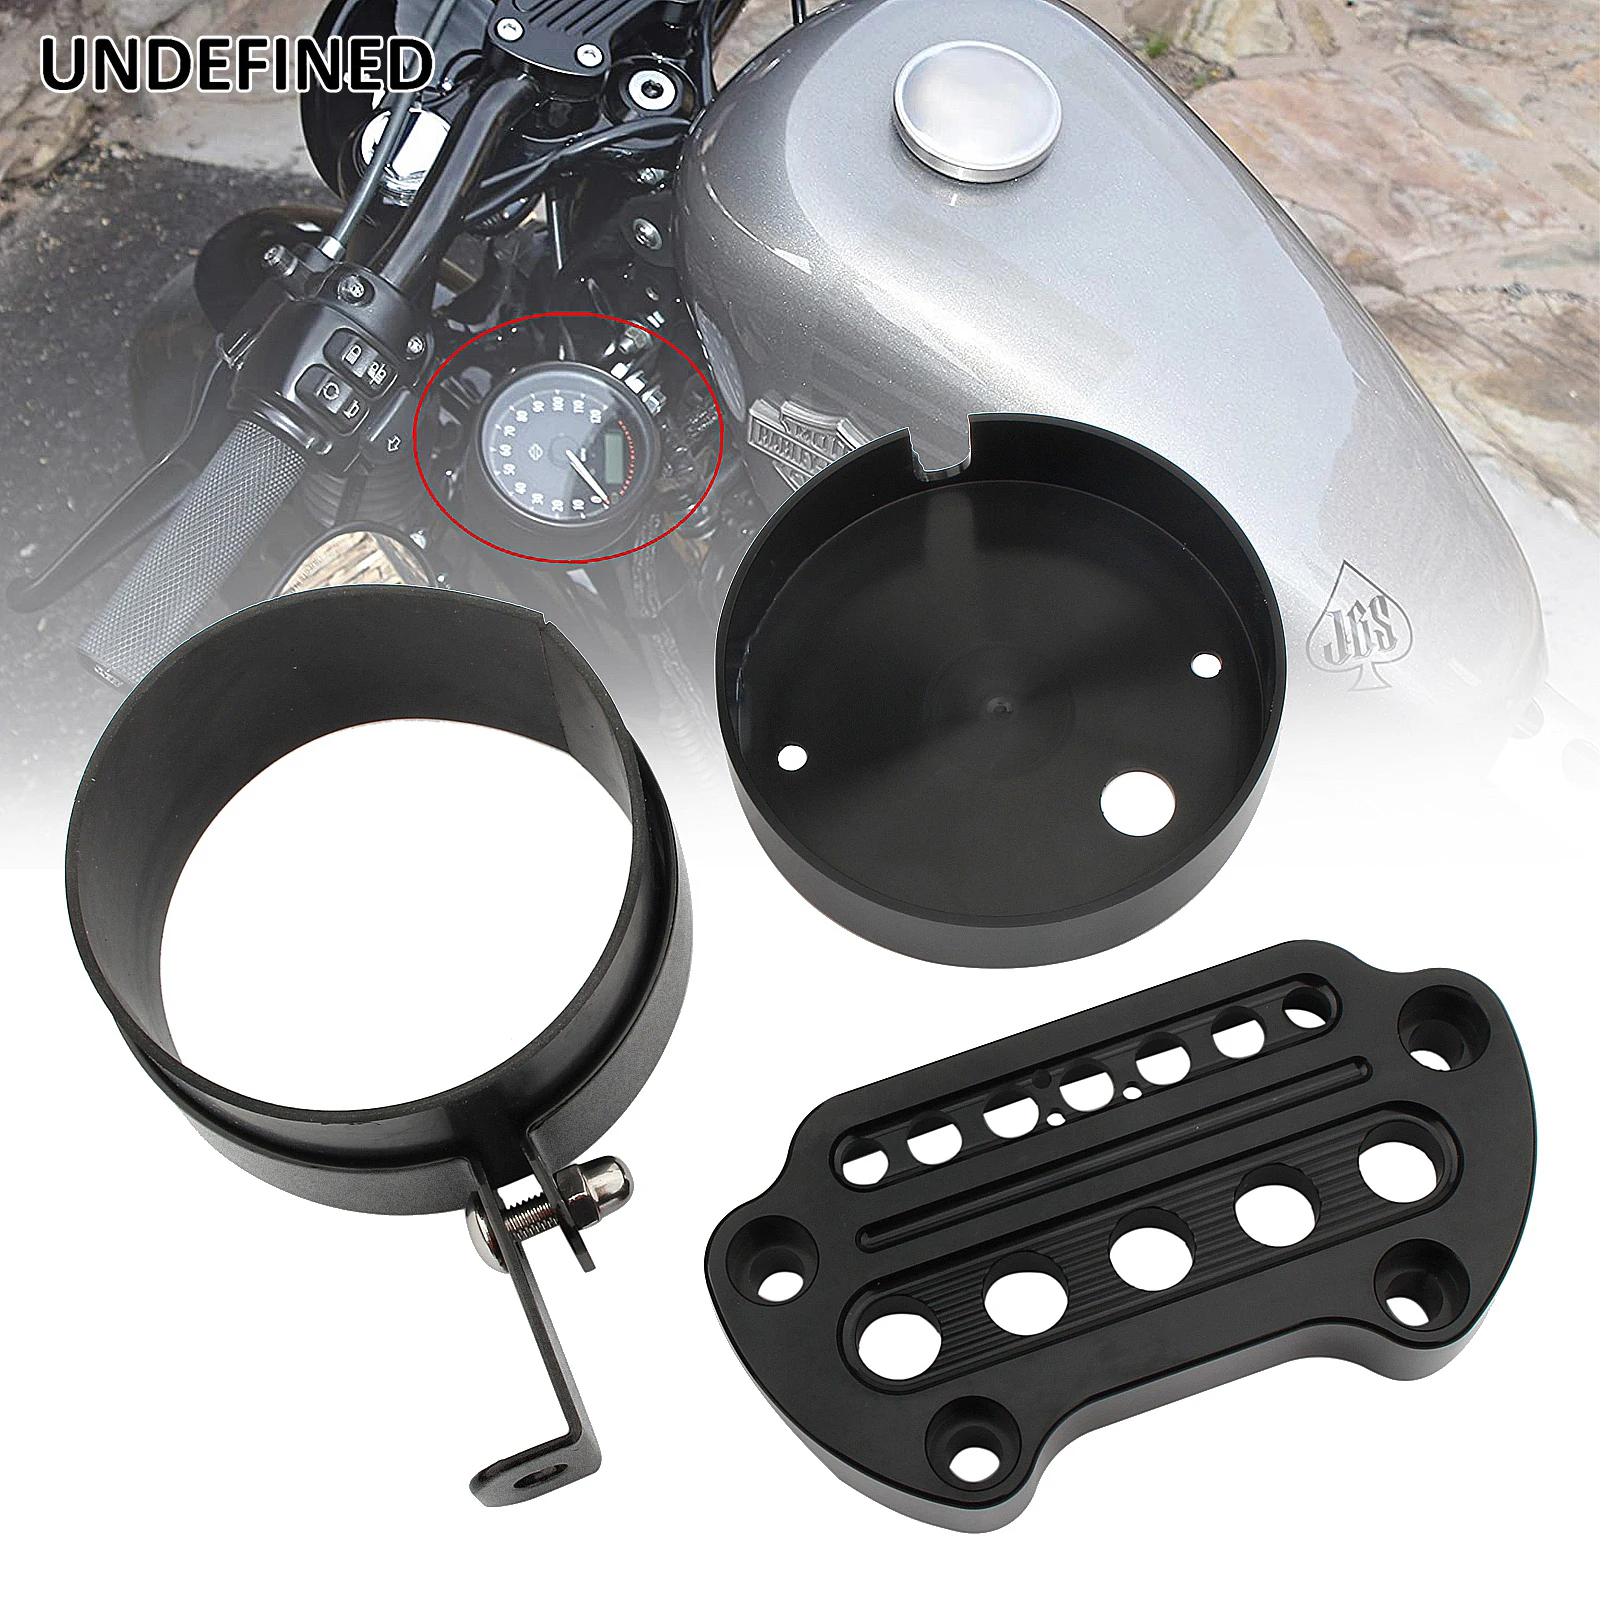 

Speedometer Bracket Relocation Cover Side Mount w/Handlebar Clamp for Harley Sportster Iron 883 1200 XL 72 48 Roadster 1993-2020